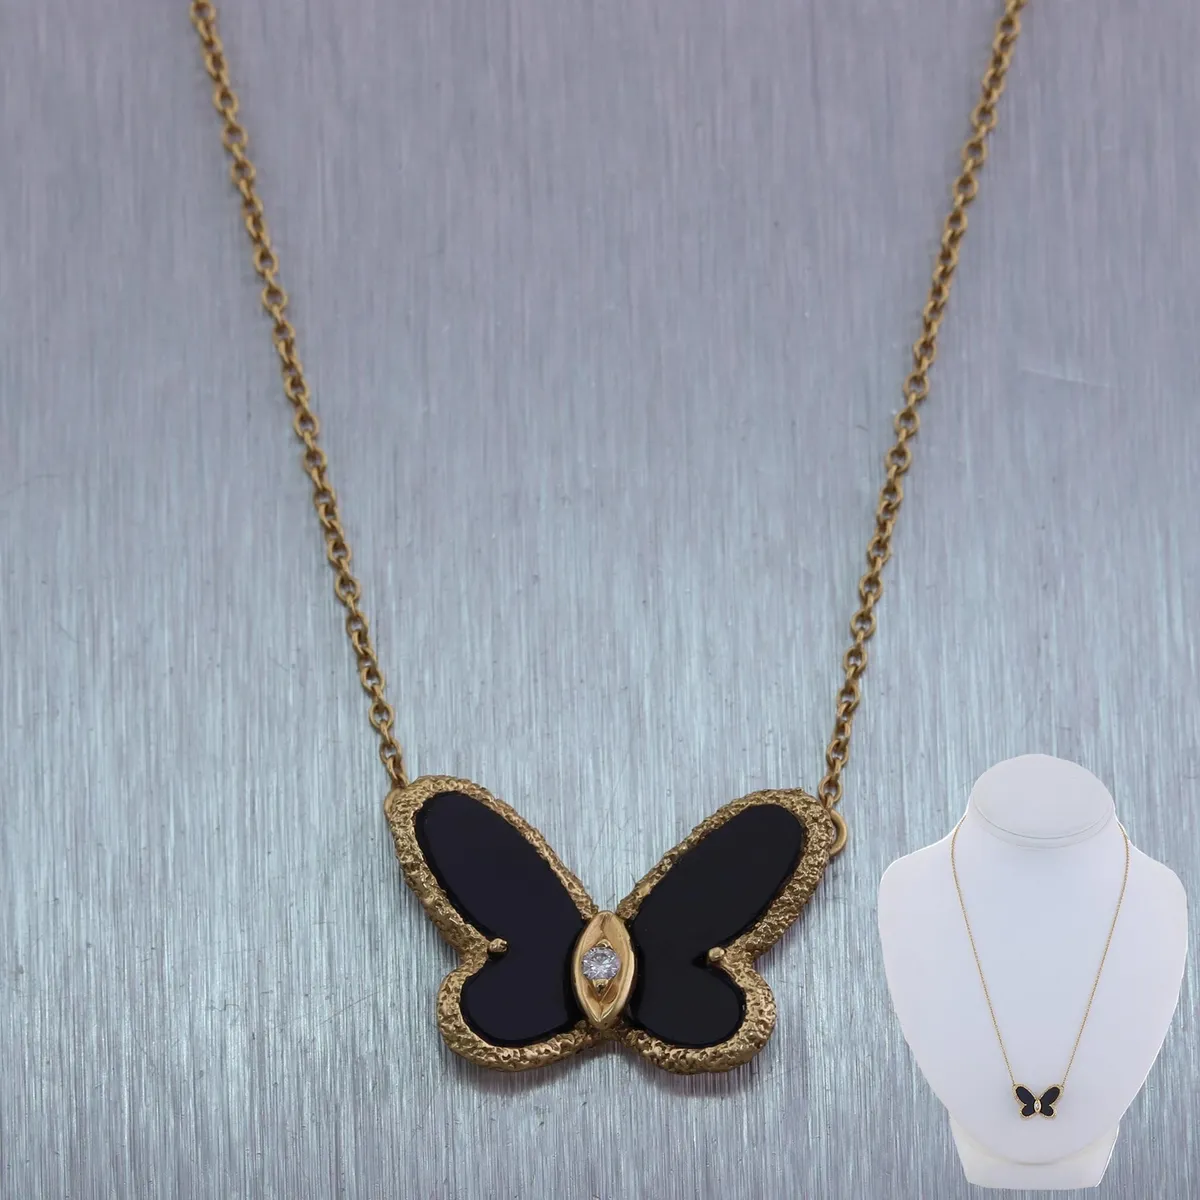 Van Cleef & Arpels Onyx and Diamond Butterfly Necklace | Farringdons  Jewellery